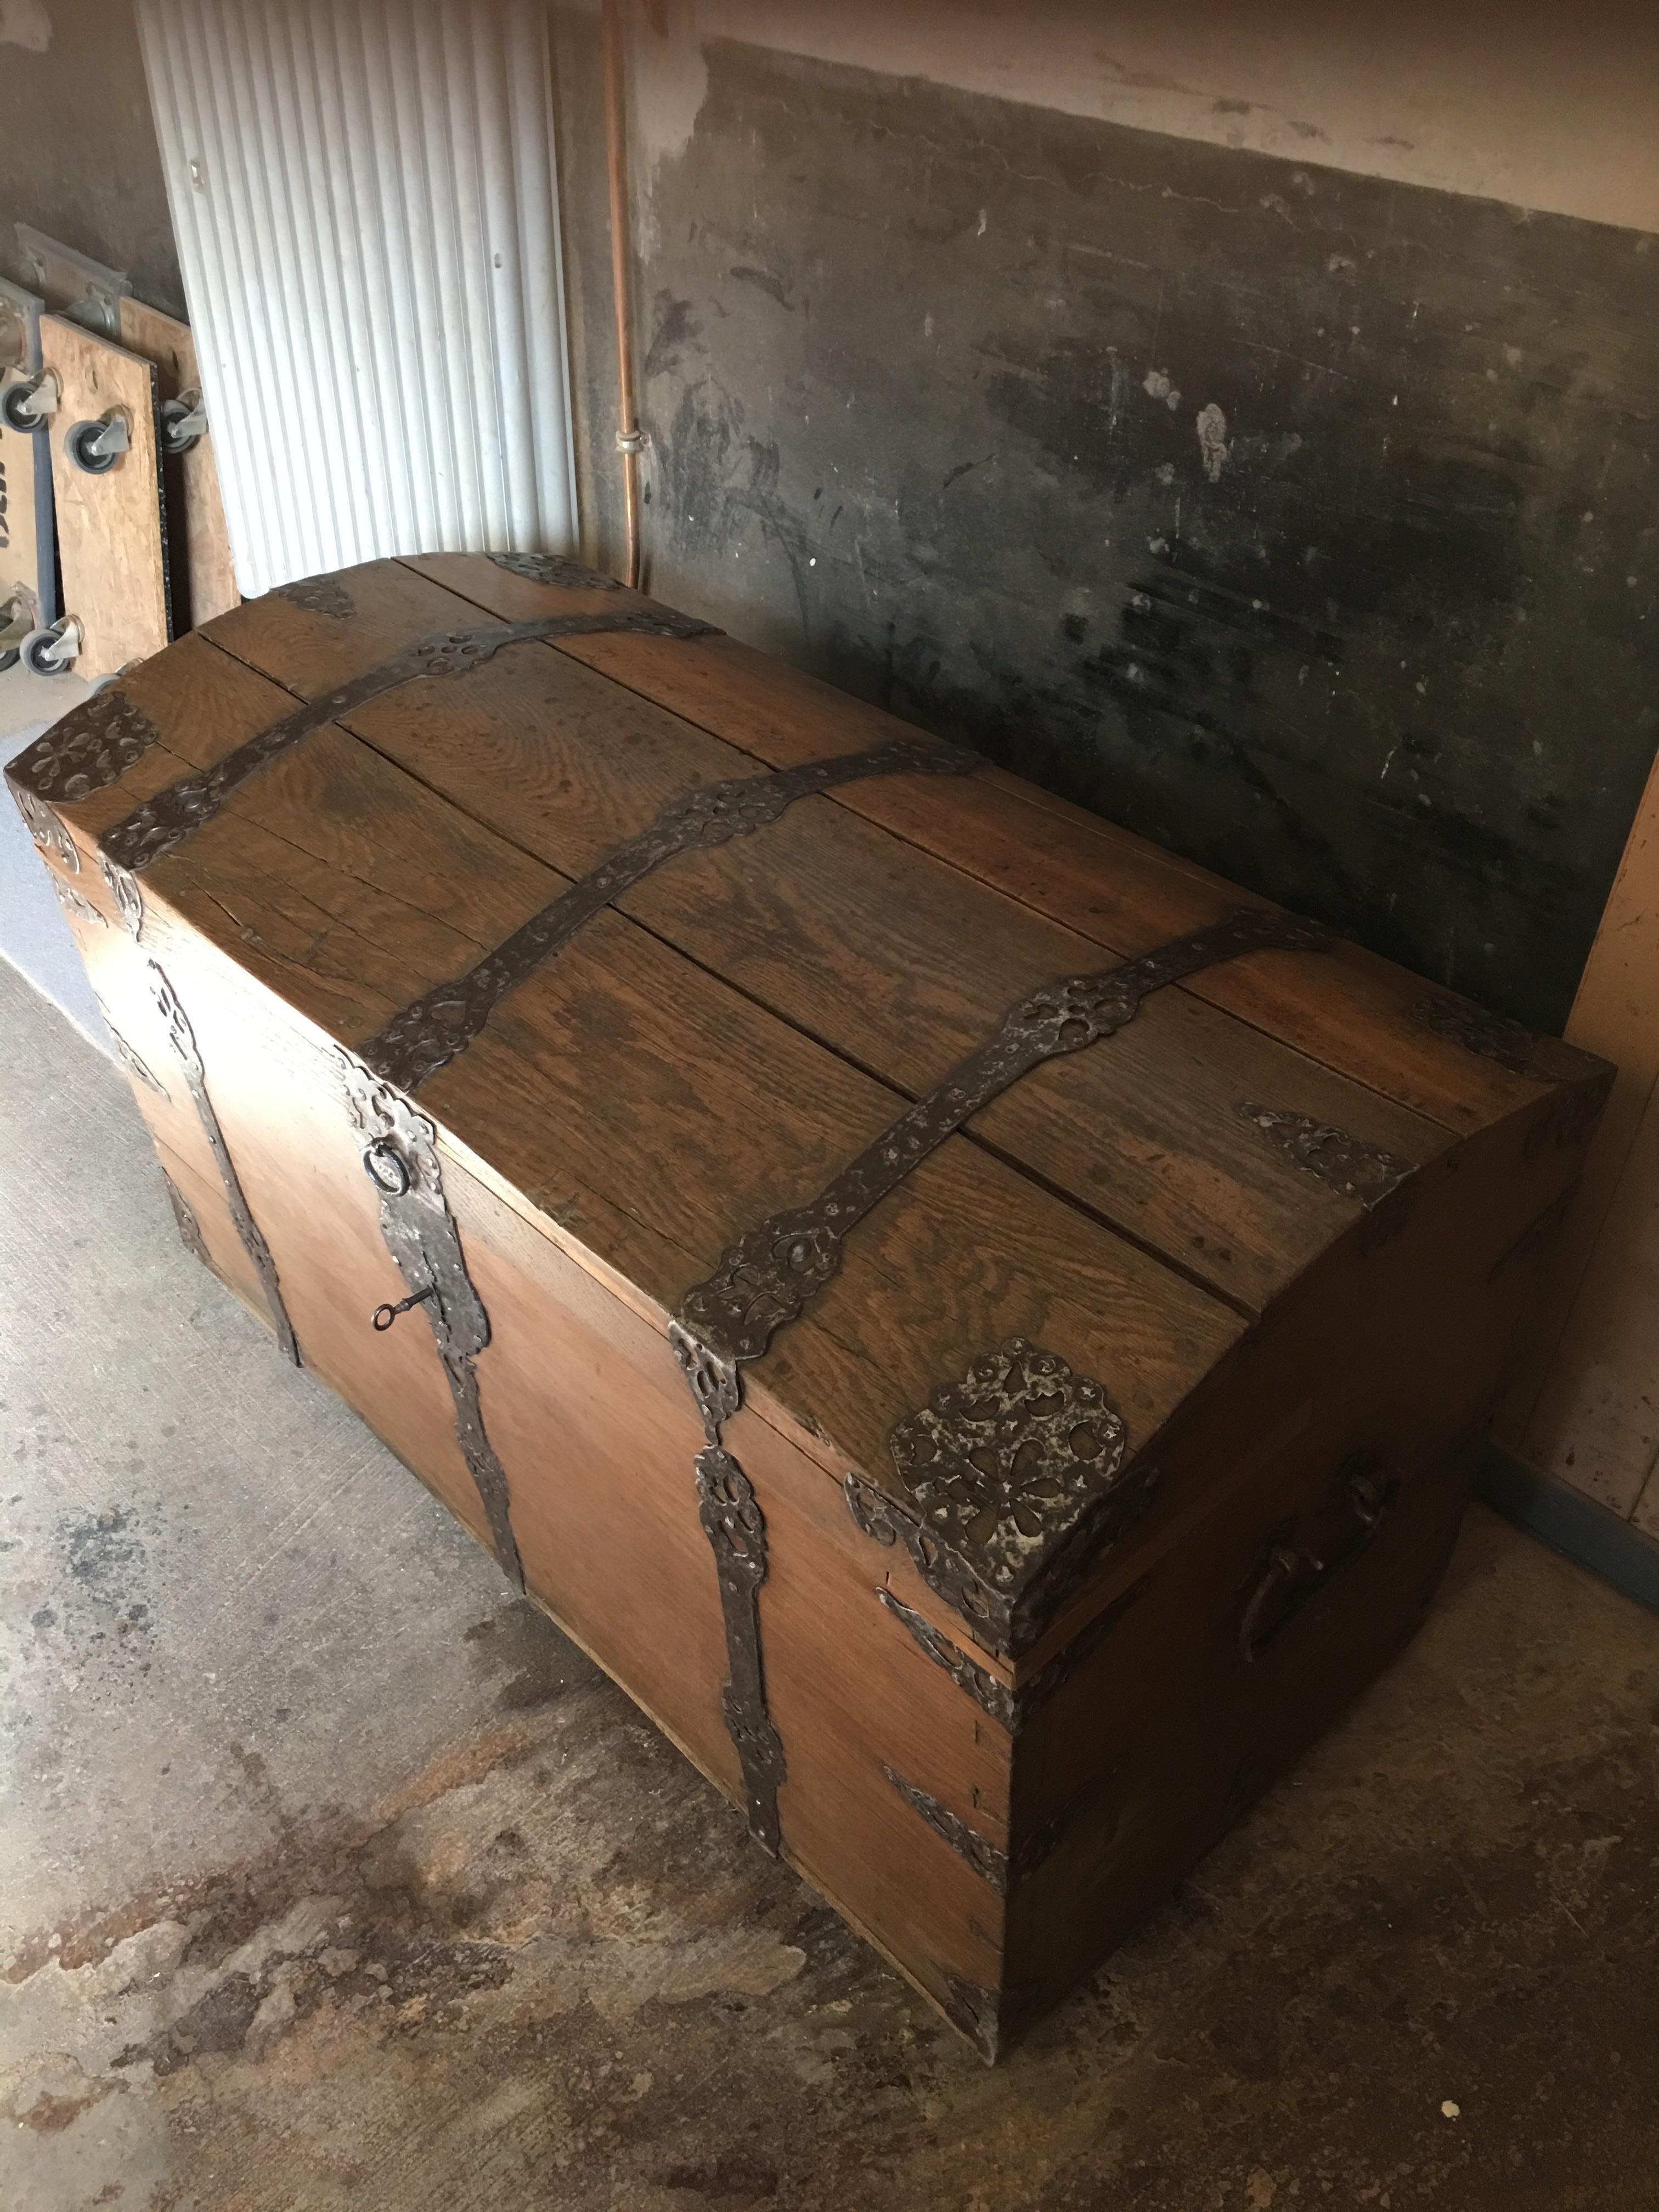 This is an antique Baroque round lid chest with iron ornaments all around. The piece is made of finest oakwood, which has been hand polished with shellac. Forged handles, lid lock in oak and standing on runners feet. The piece shines through the